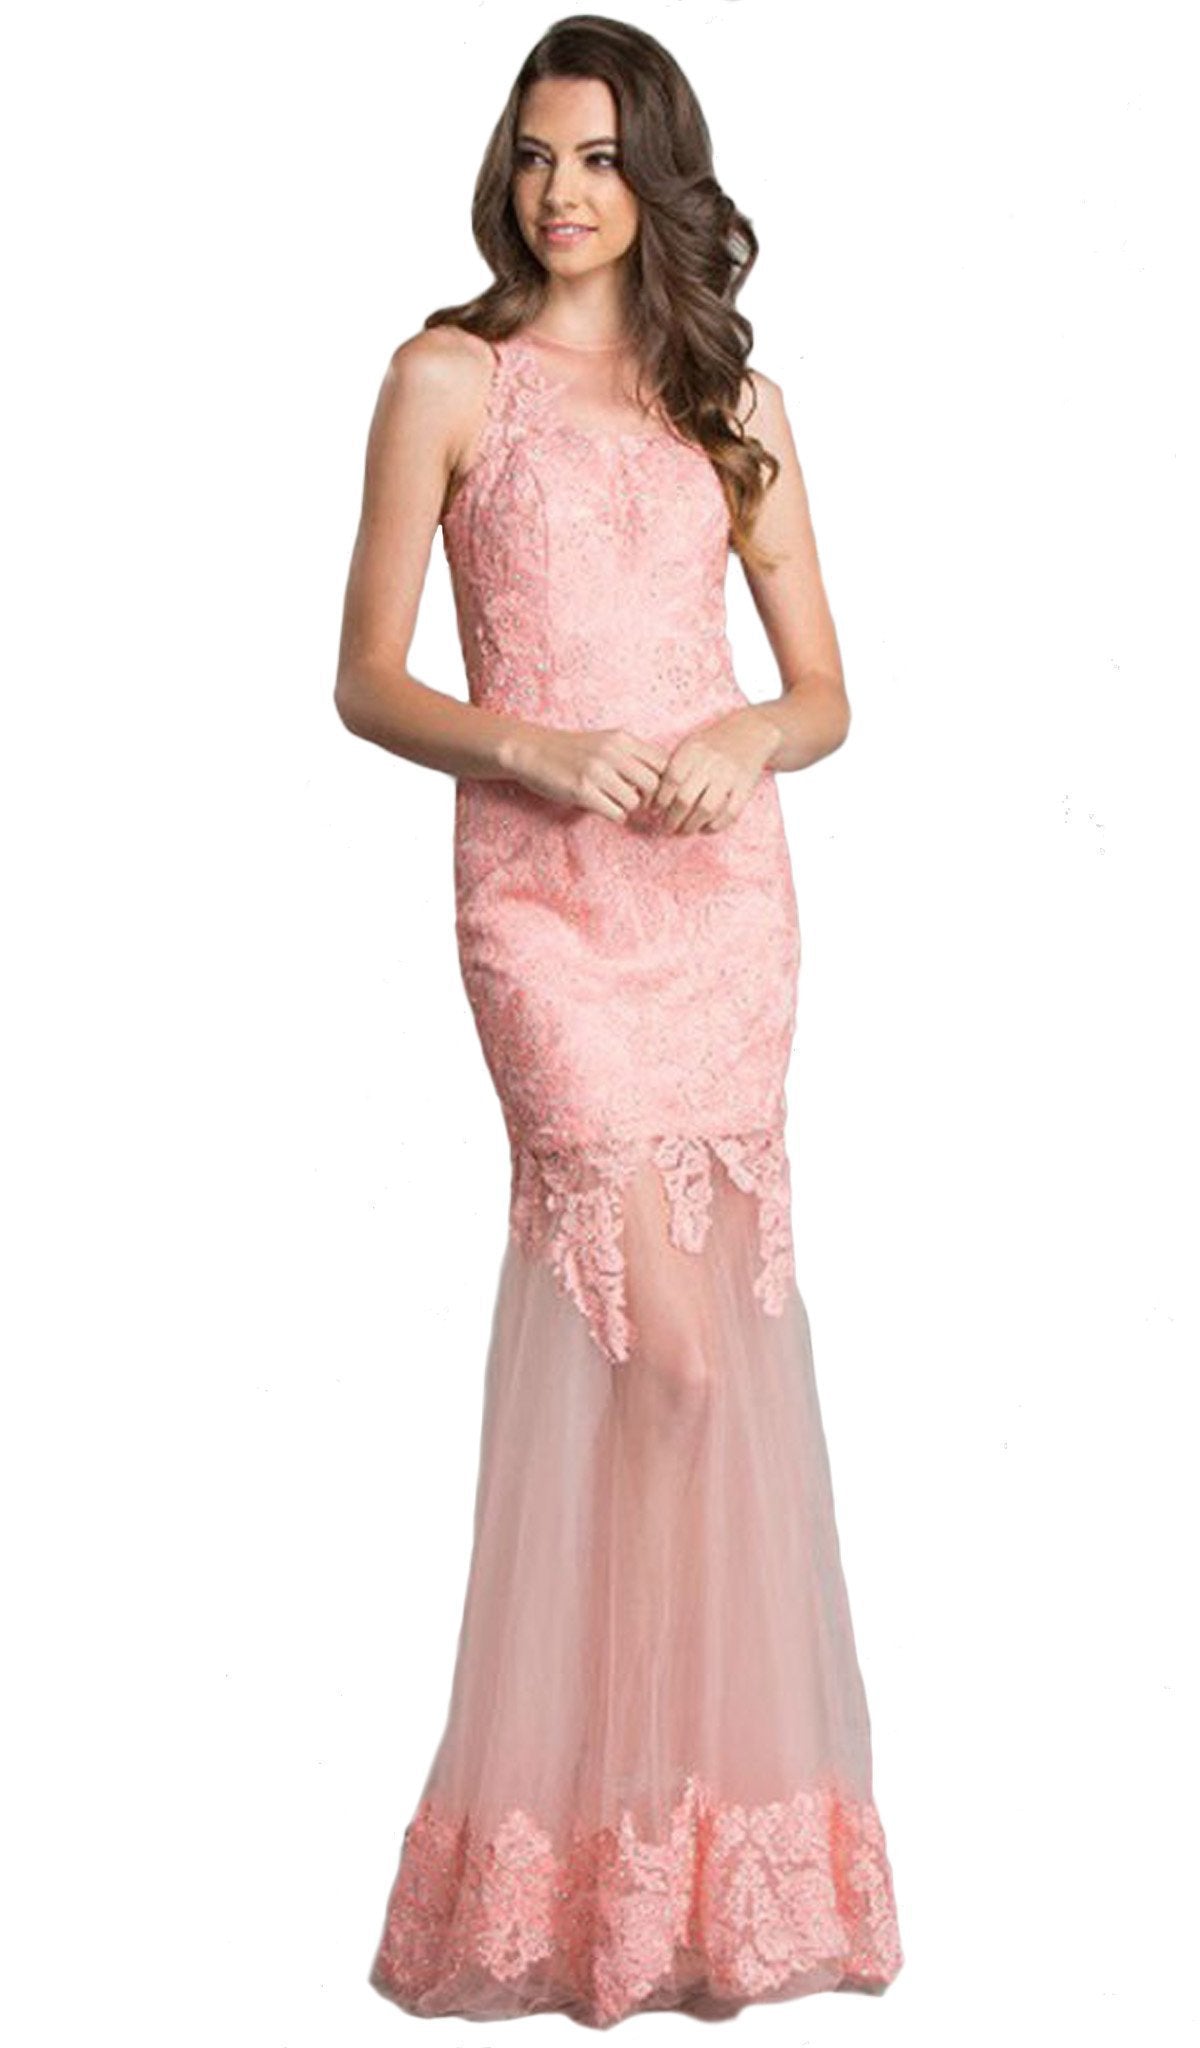 Aspeed Design - Long Sheath Gown with Sheer Illusion Skirt